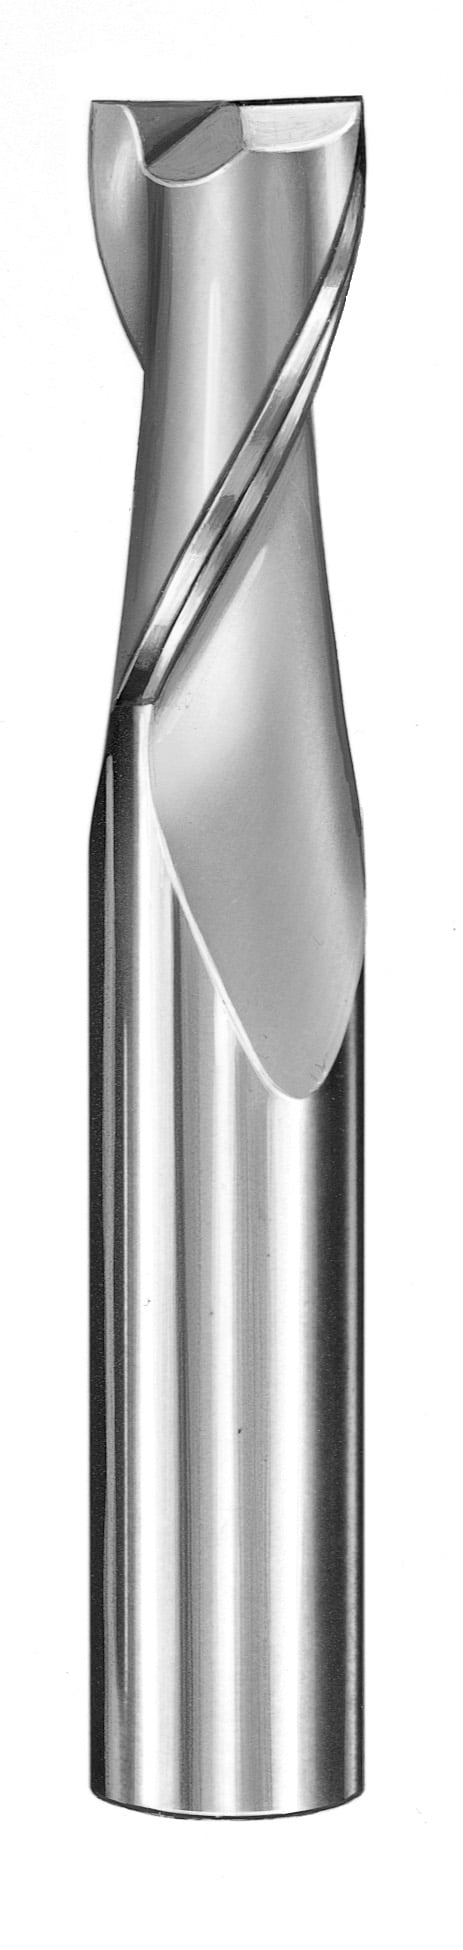 5/16" Dia, 2 Flute, Square End End Mill - 91282